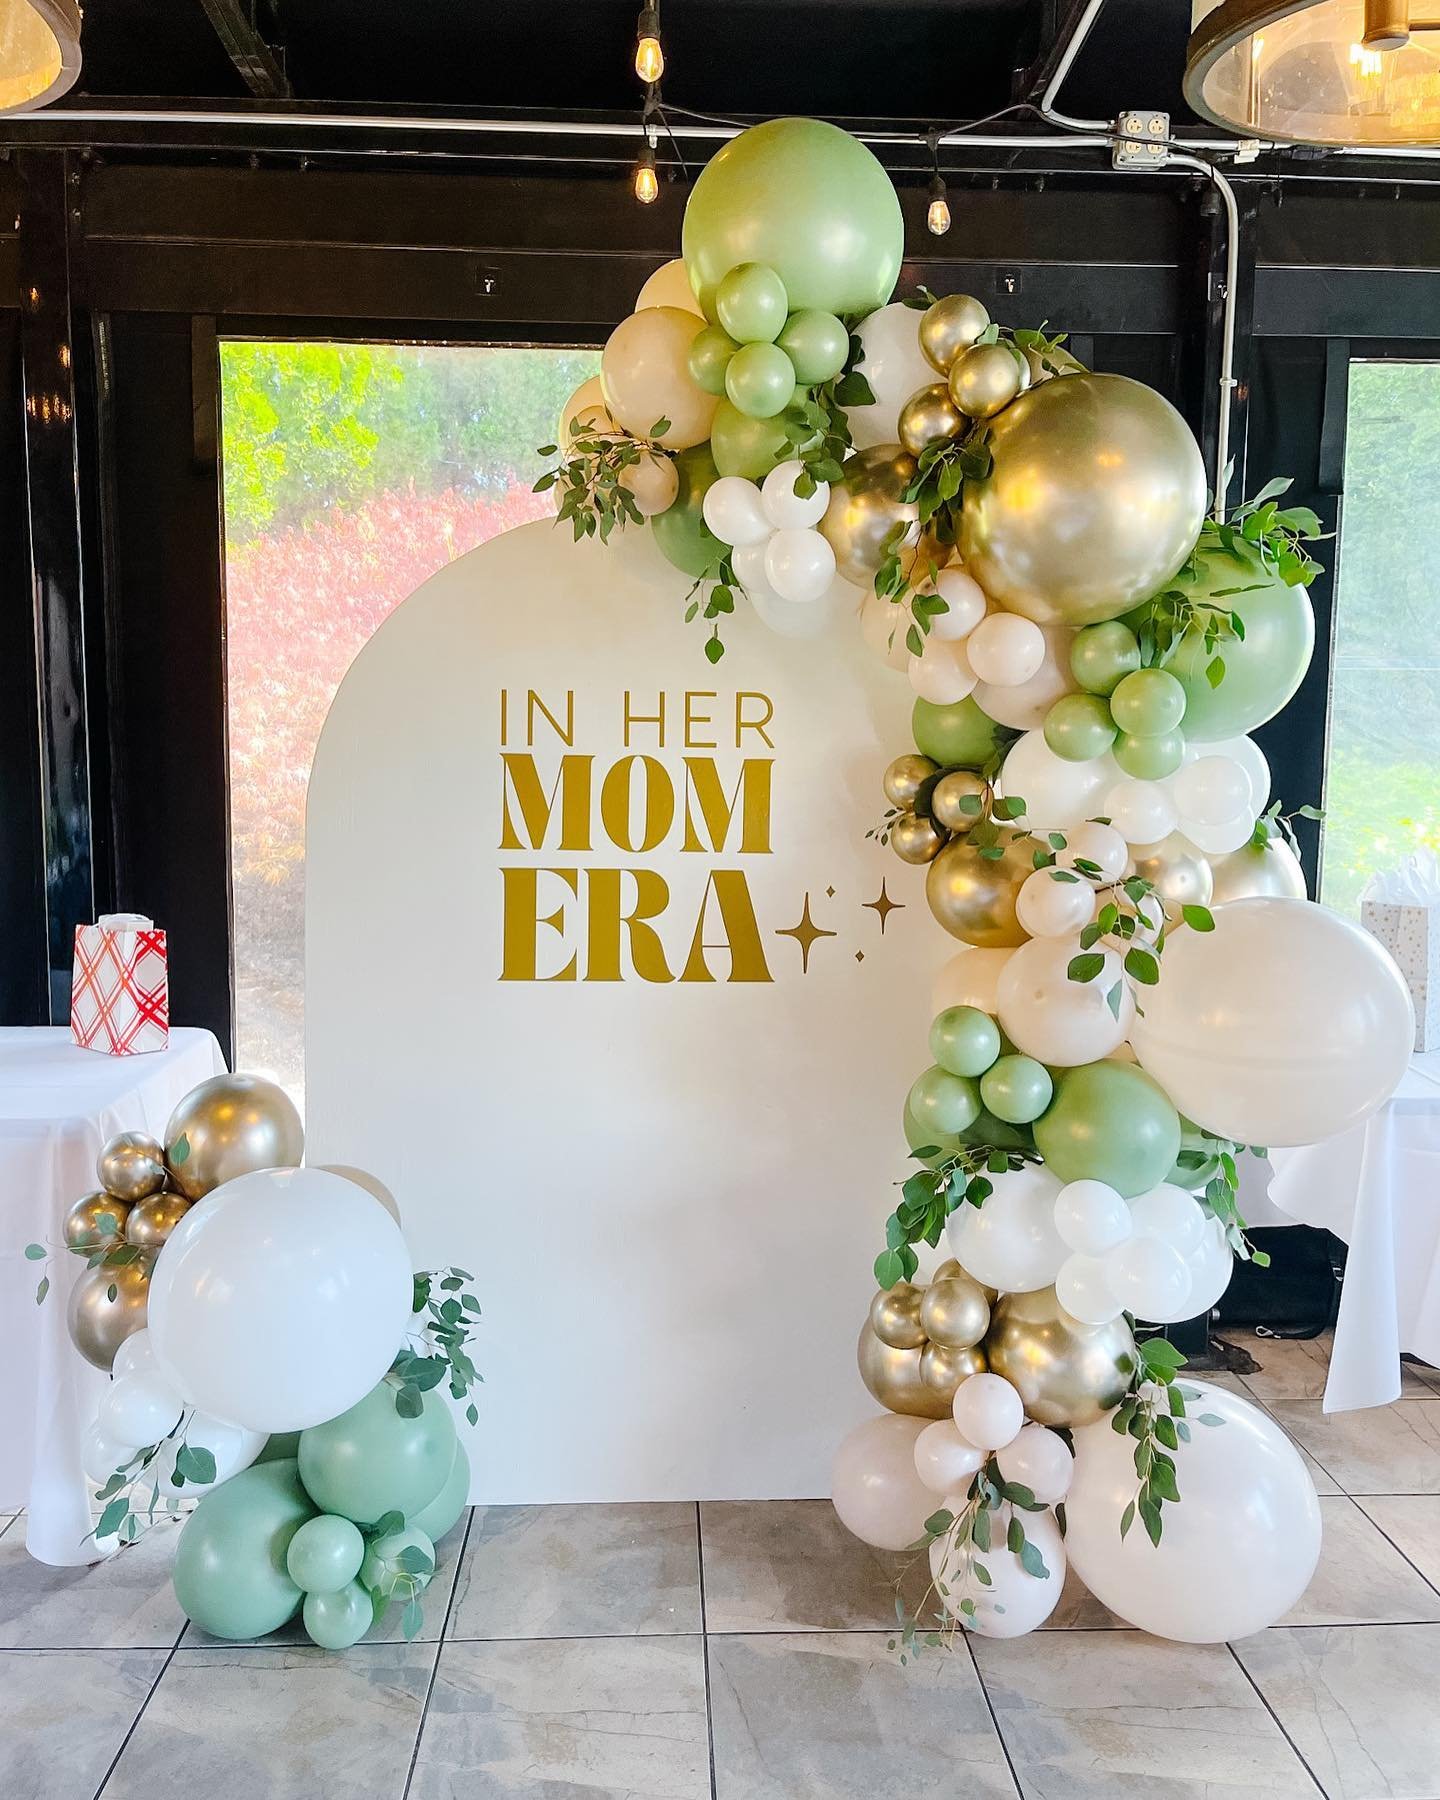 🌿In Our Eucalyptus Era🌿
Swipe to see not one, but three recent installs with one of our favorite colors, @sempertexus_betallic Eucalyptus. It is such a staple color that can be complimented with various neutrals for bridal showers, baby showers and